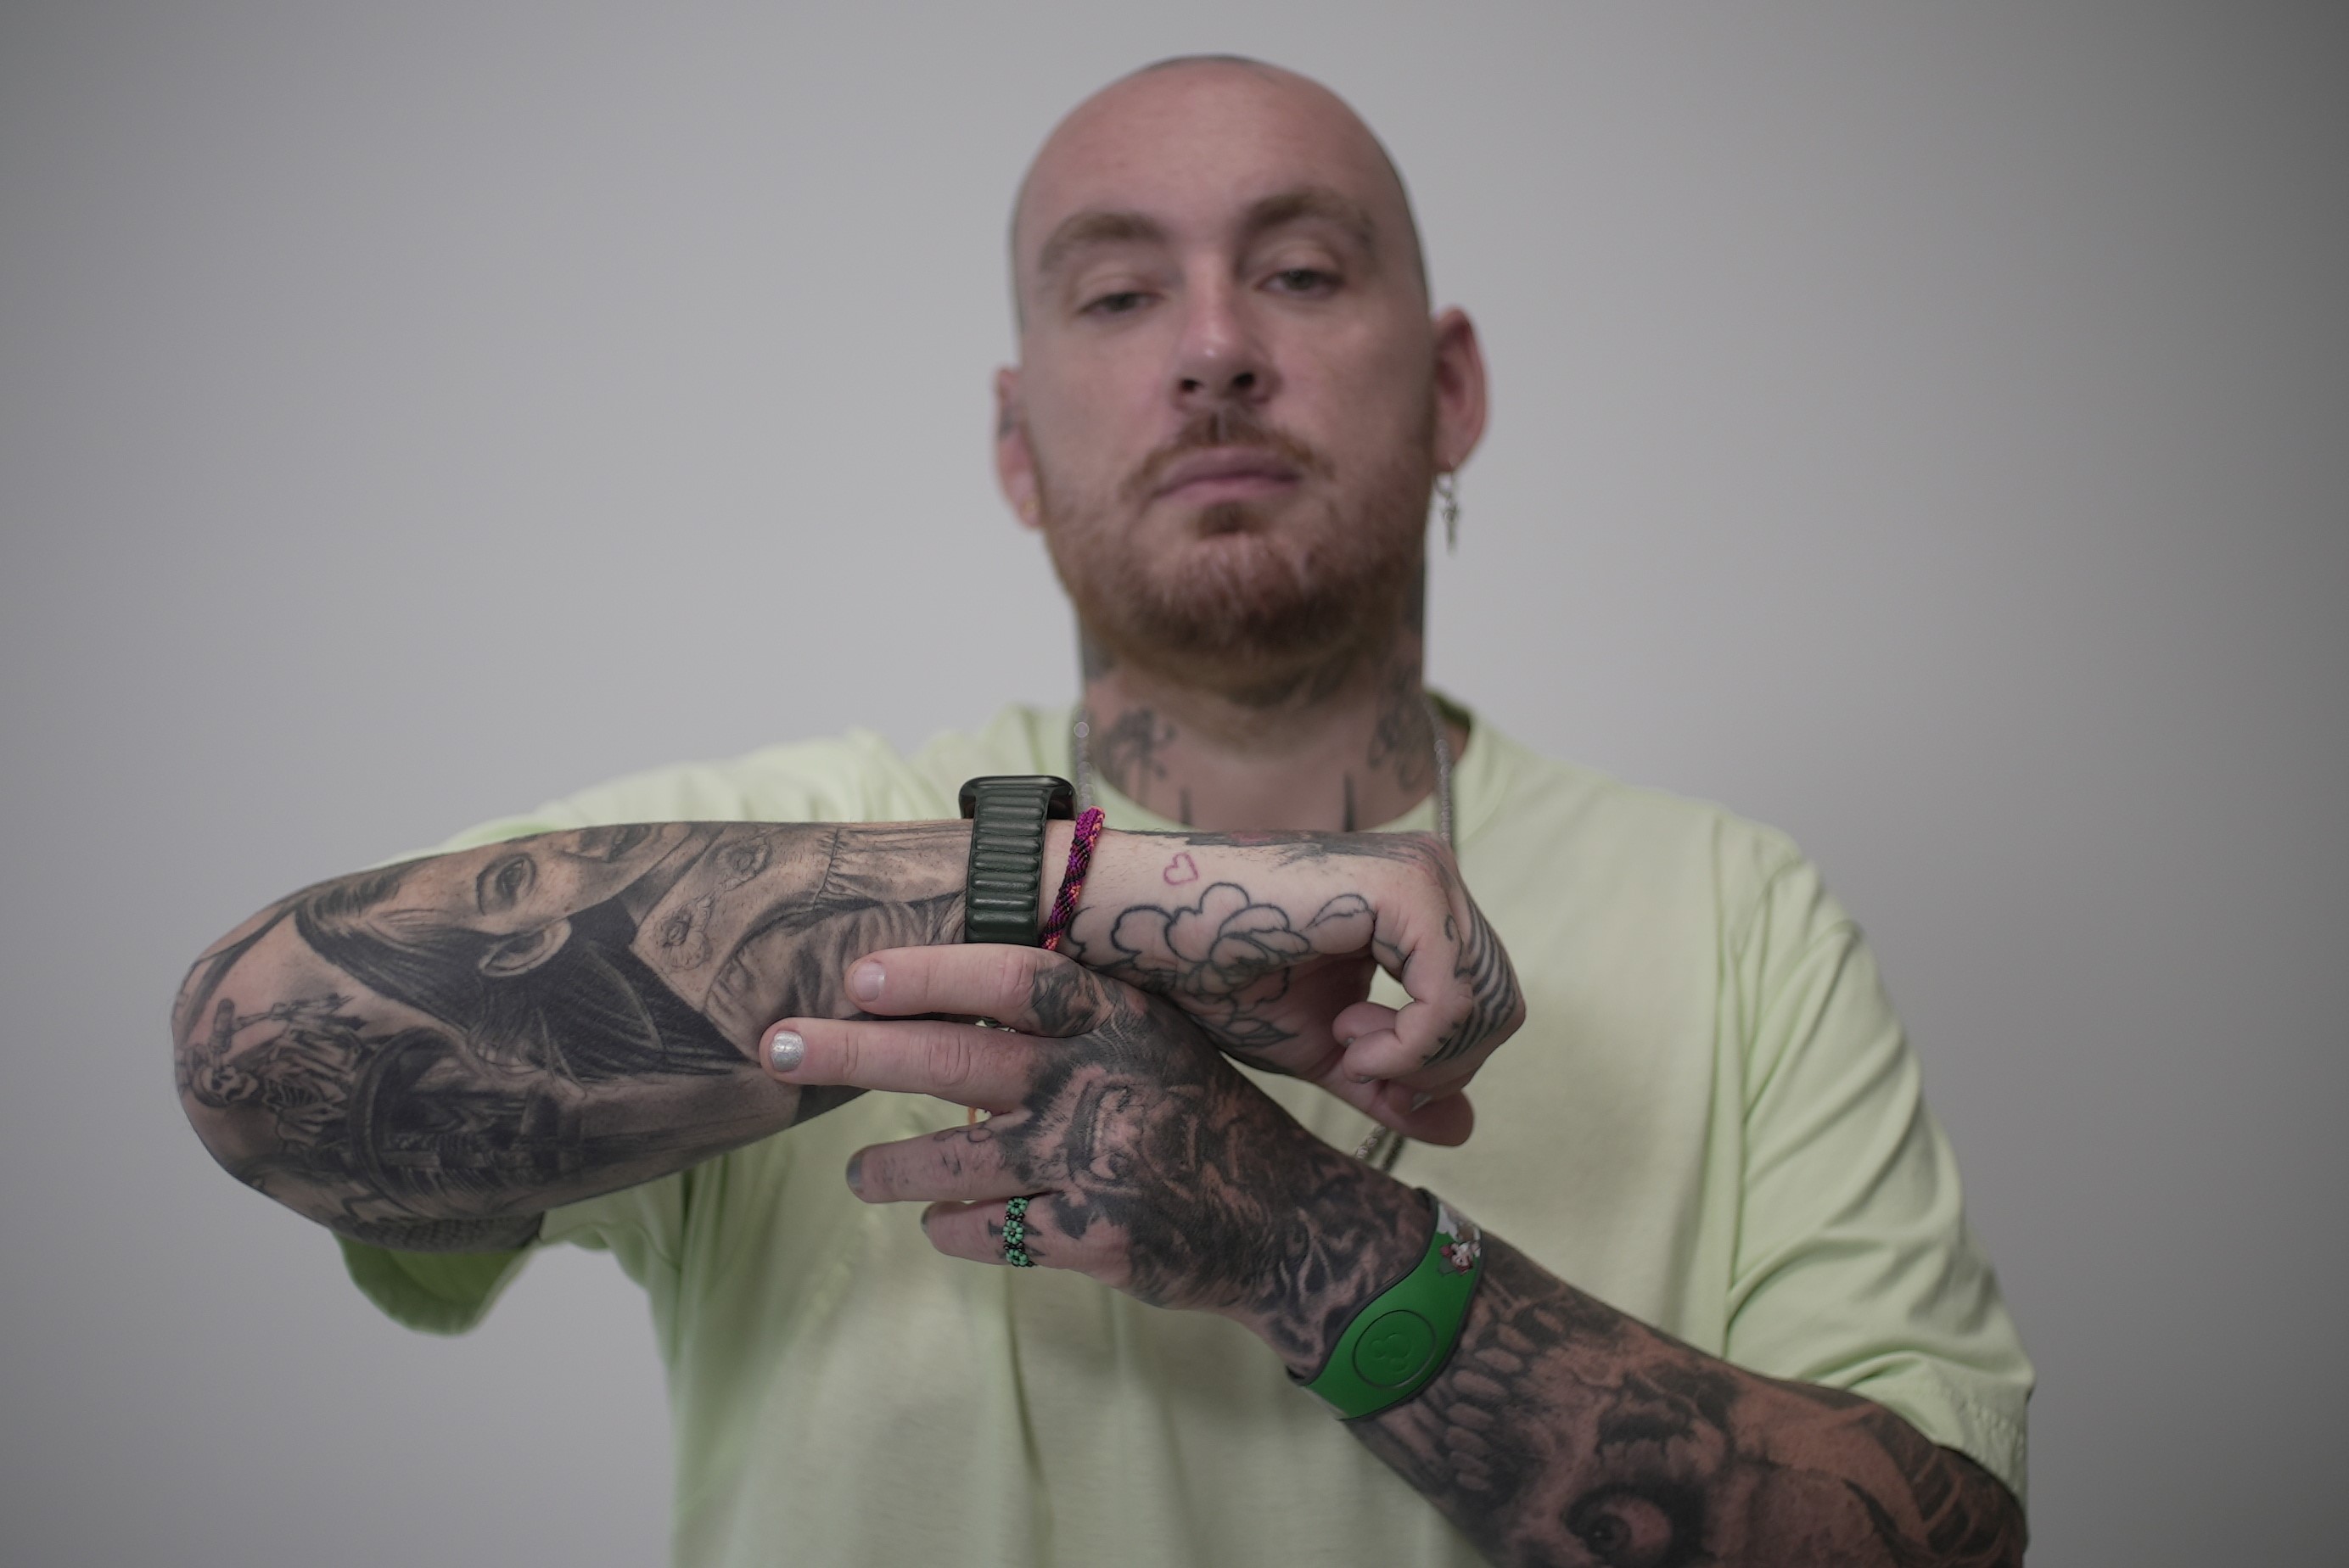 The rebuilt Ego tattoo machine saves the hand that inks